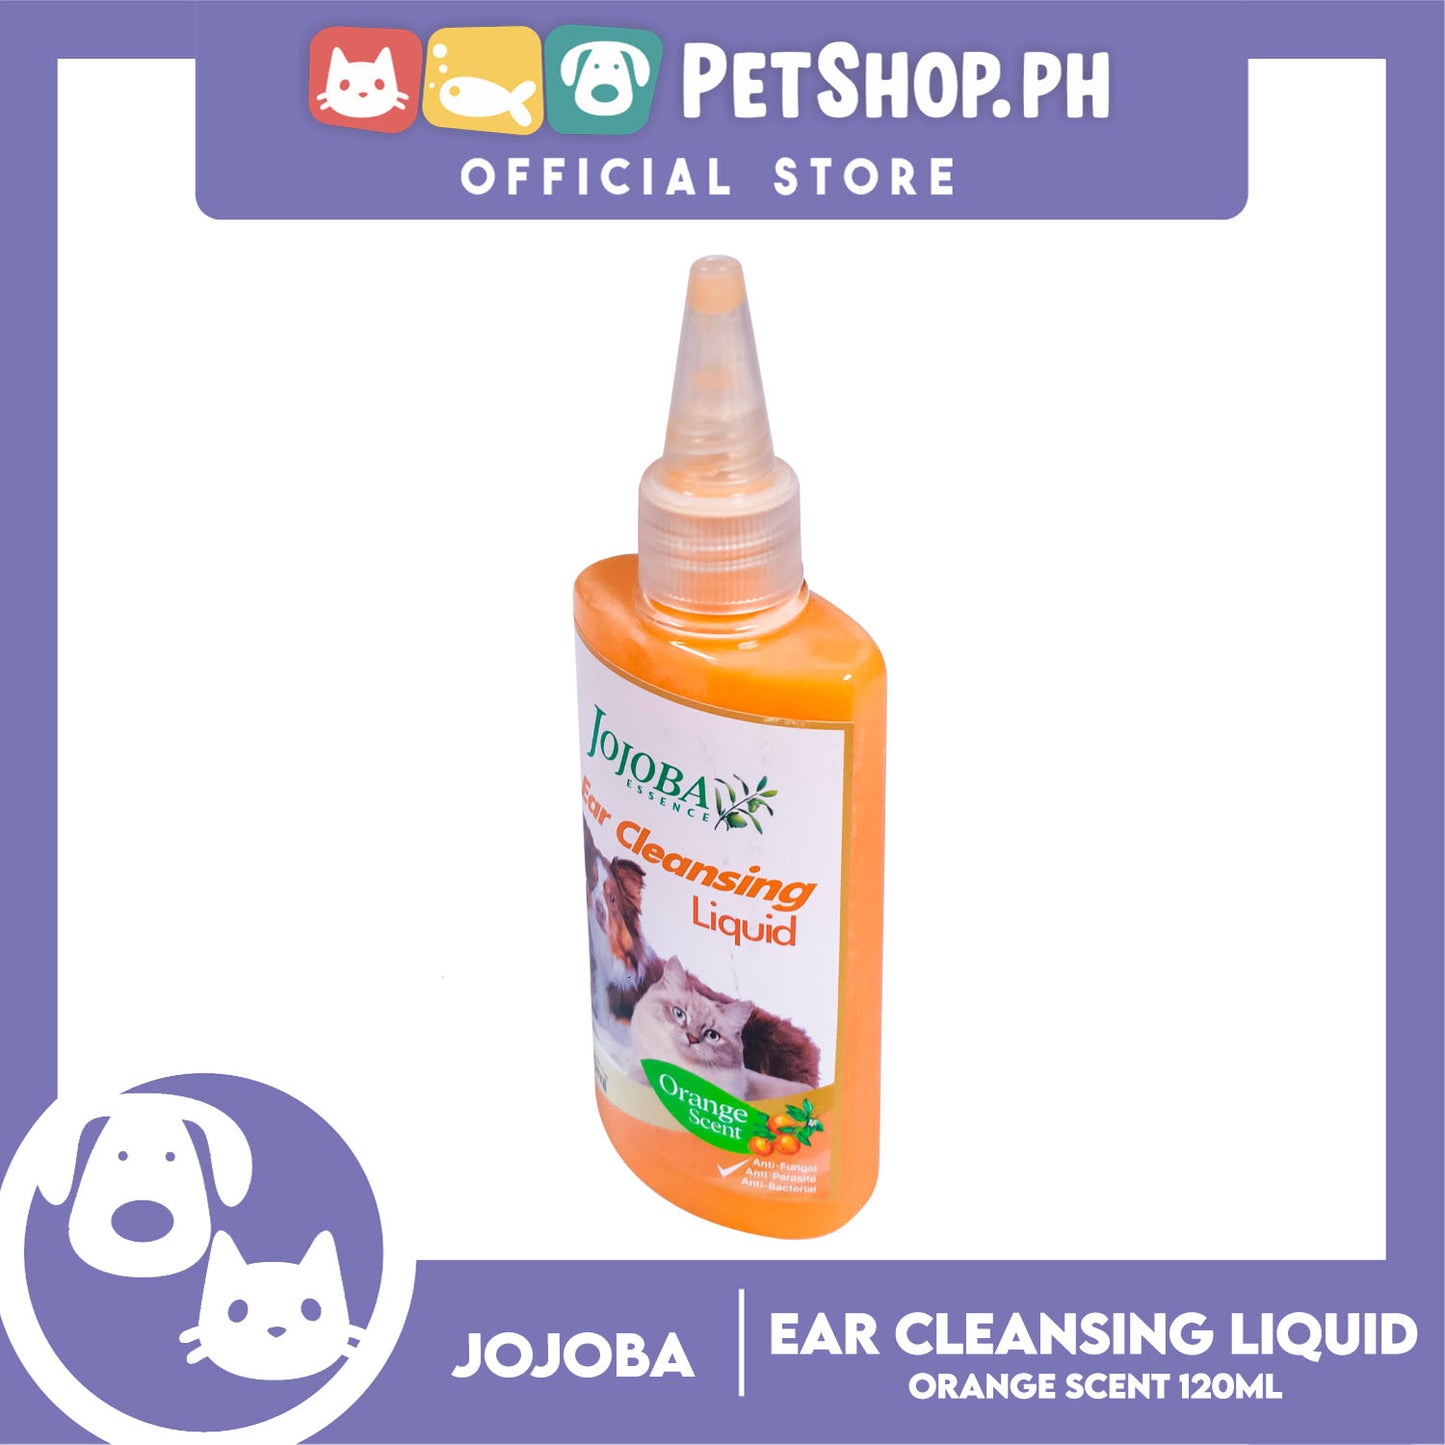 Jojoba Essence Ear Cleansing Liquid 120ml (Orange Scent) Anti-Fungal, Anti-Parasite, Anti-Bacterial For Dogs And Cats